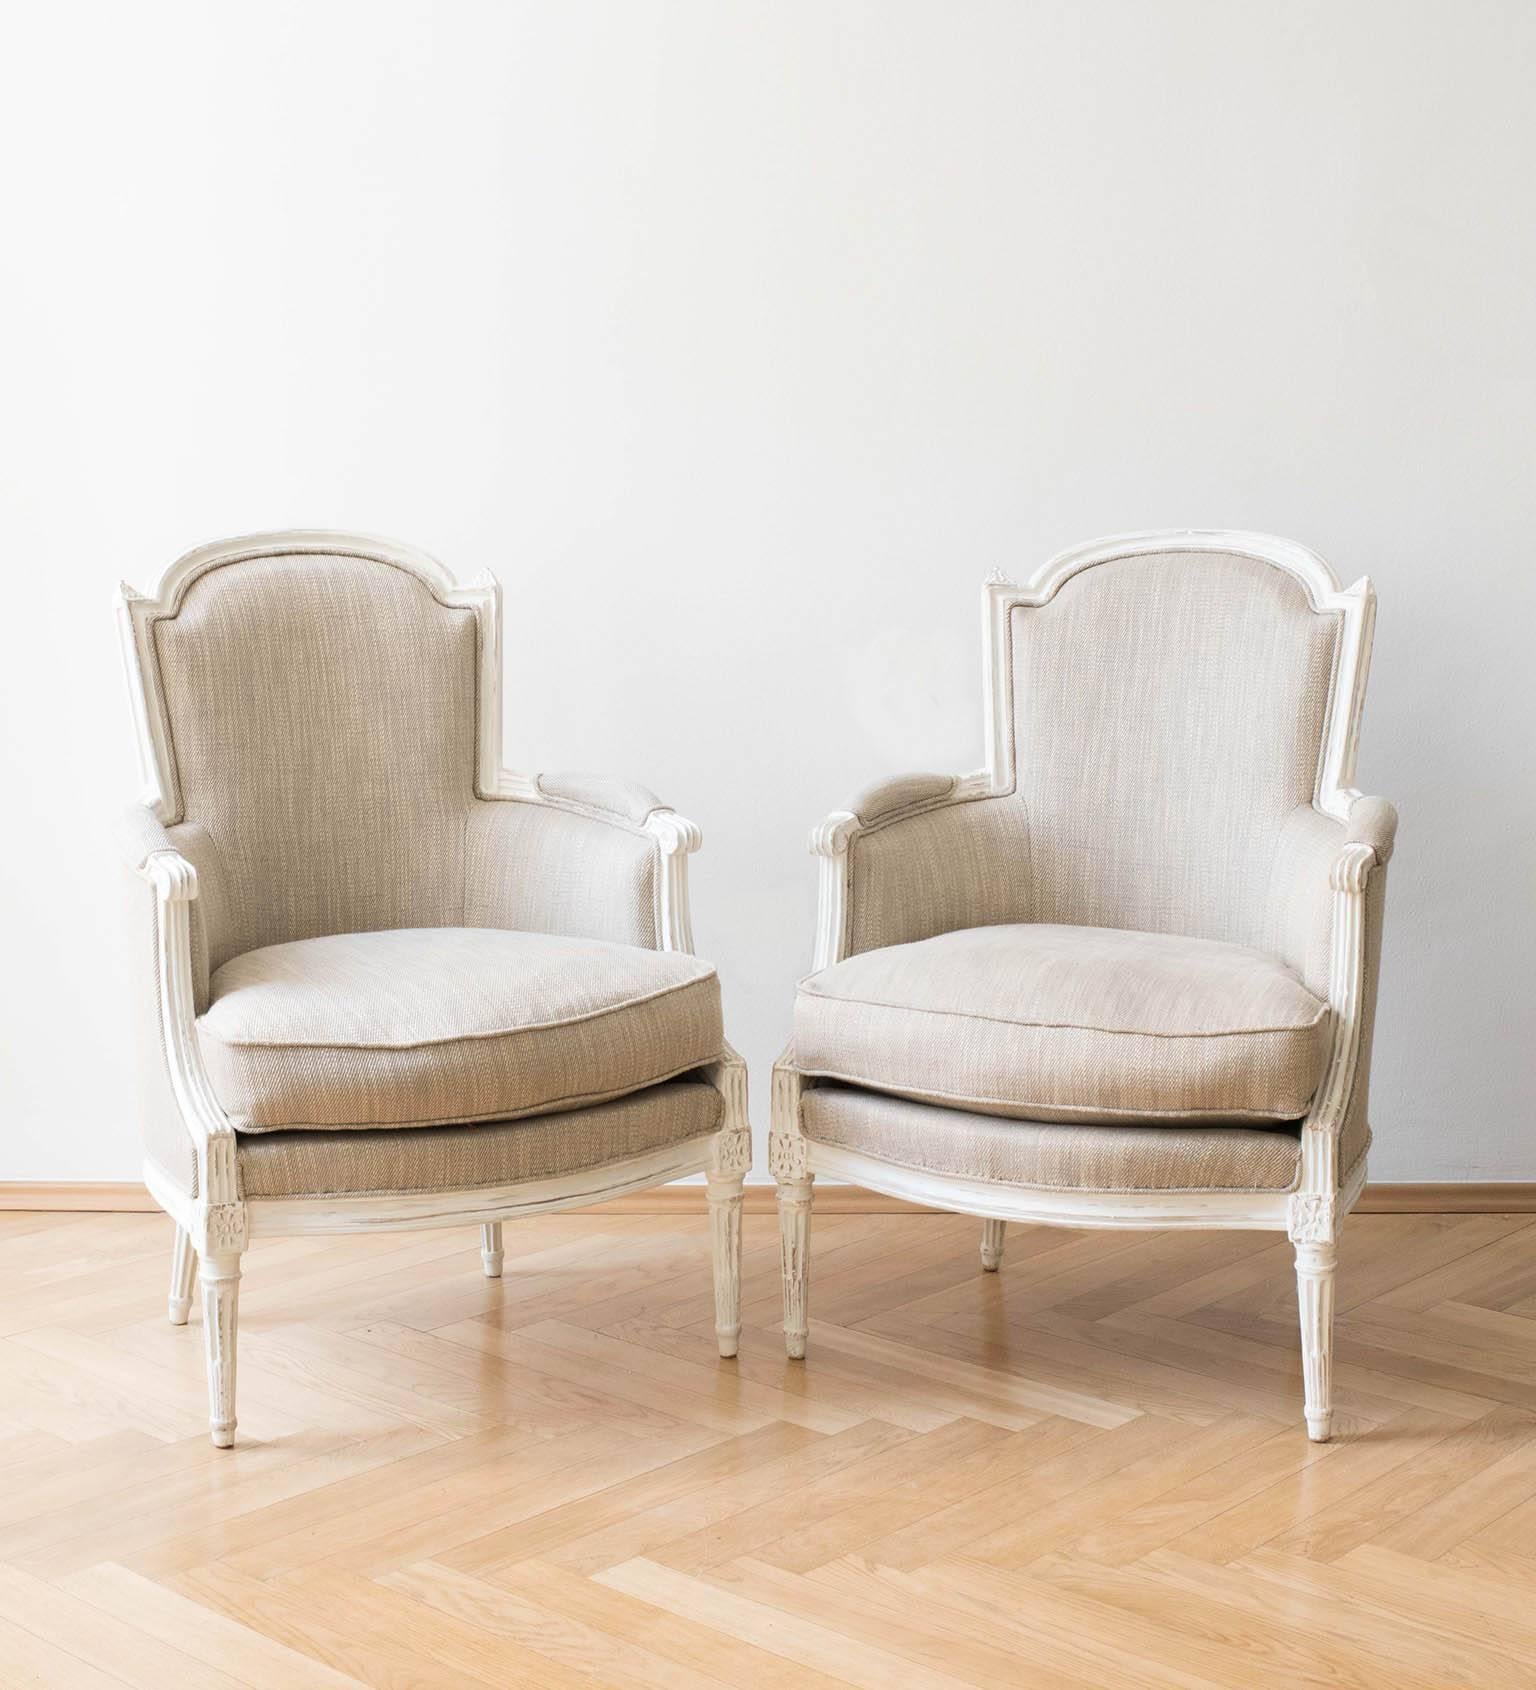 Pair of French Louis XVI Bergères Chairs 18th Century Gustavian/Shabby Chic Styl For Sale 1